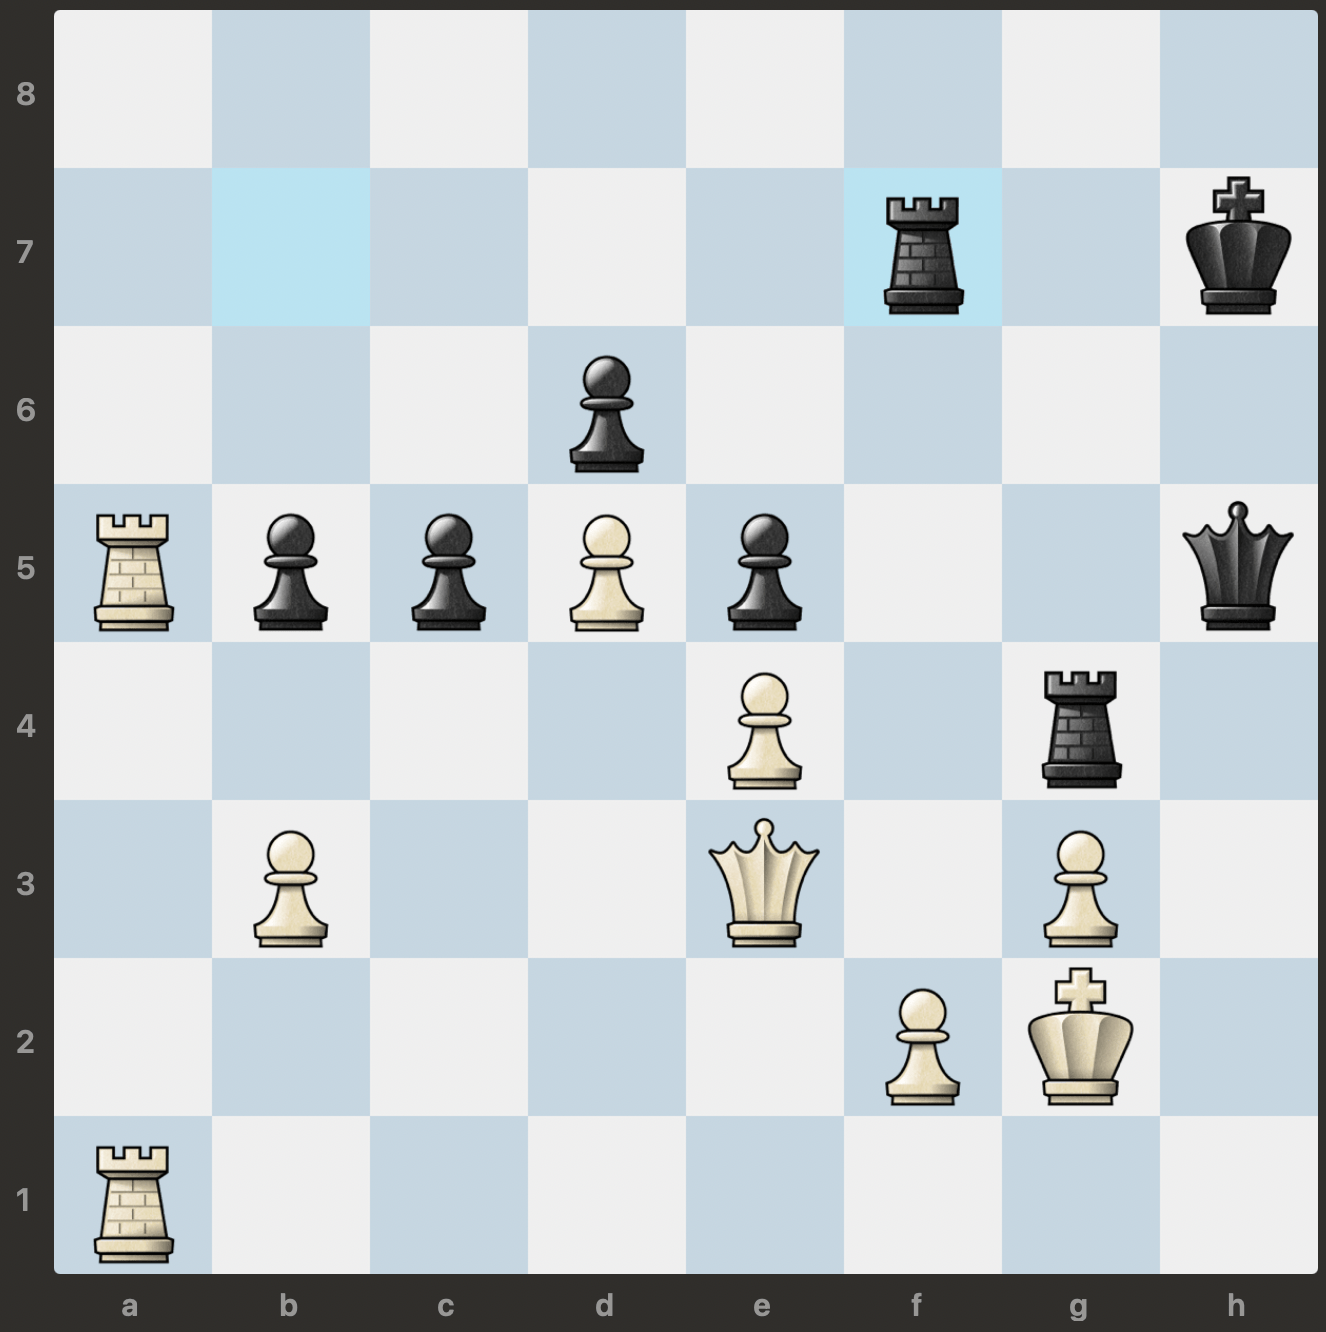 what is the most powerful piece in a chess game? - Chess Forums